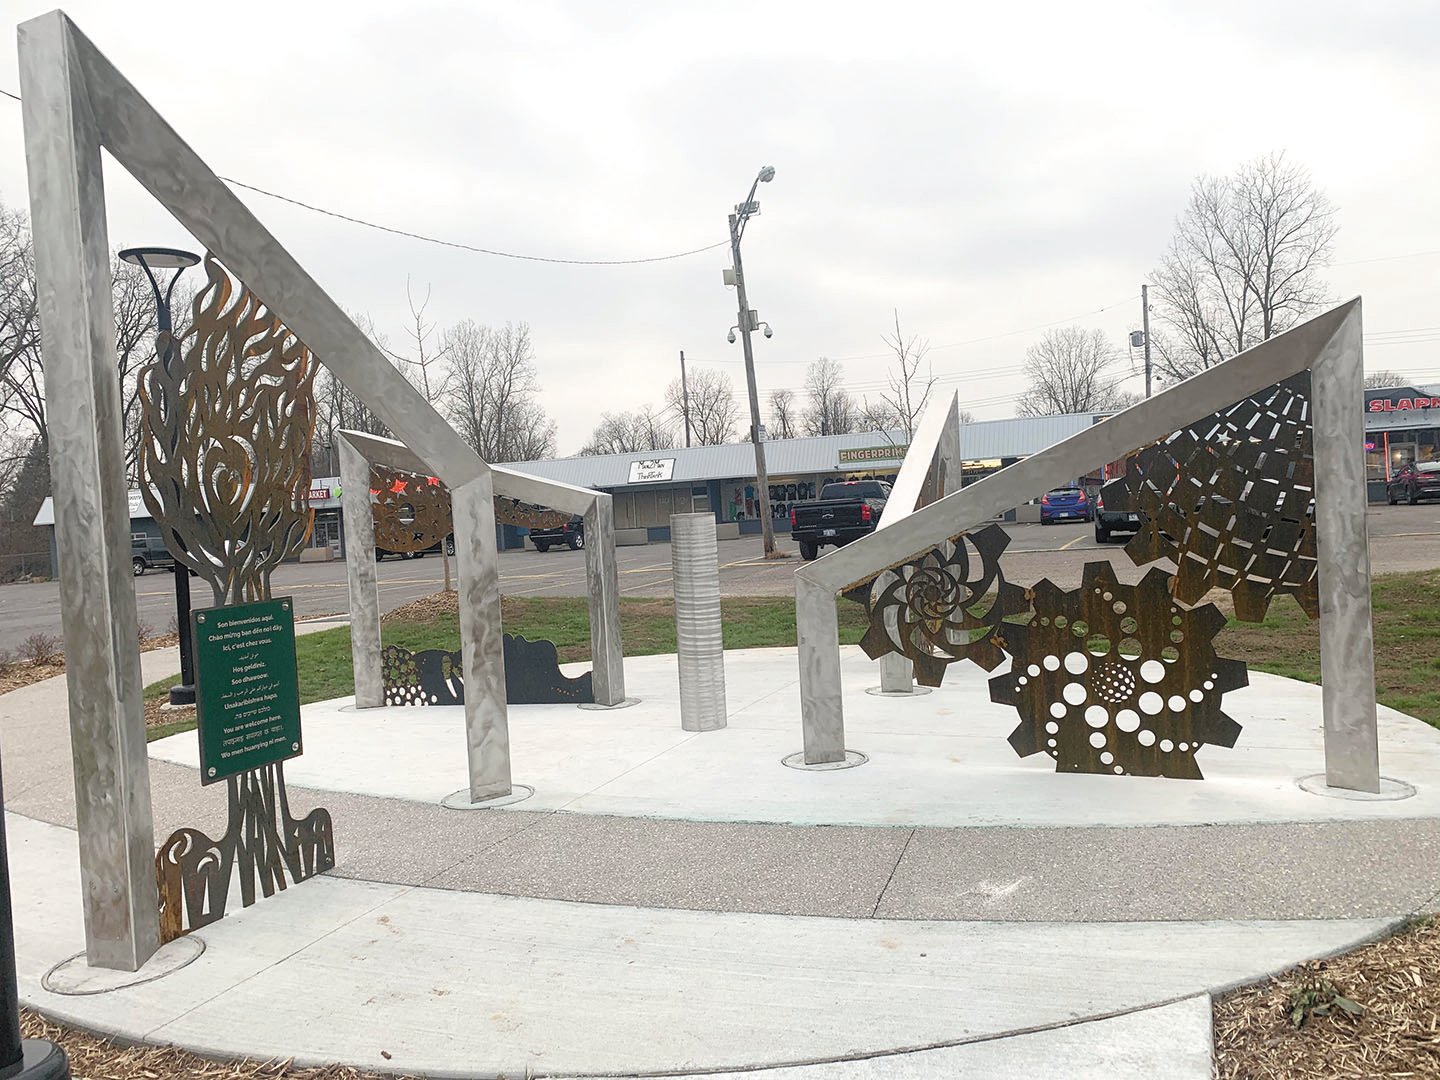 Encompass Lansing, designed by David Such and Fred Hammond, is installed on the corner of Pleasant Grove and Holmes roads.